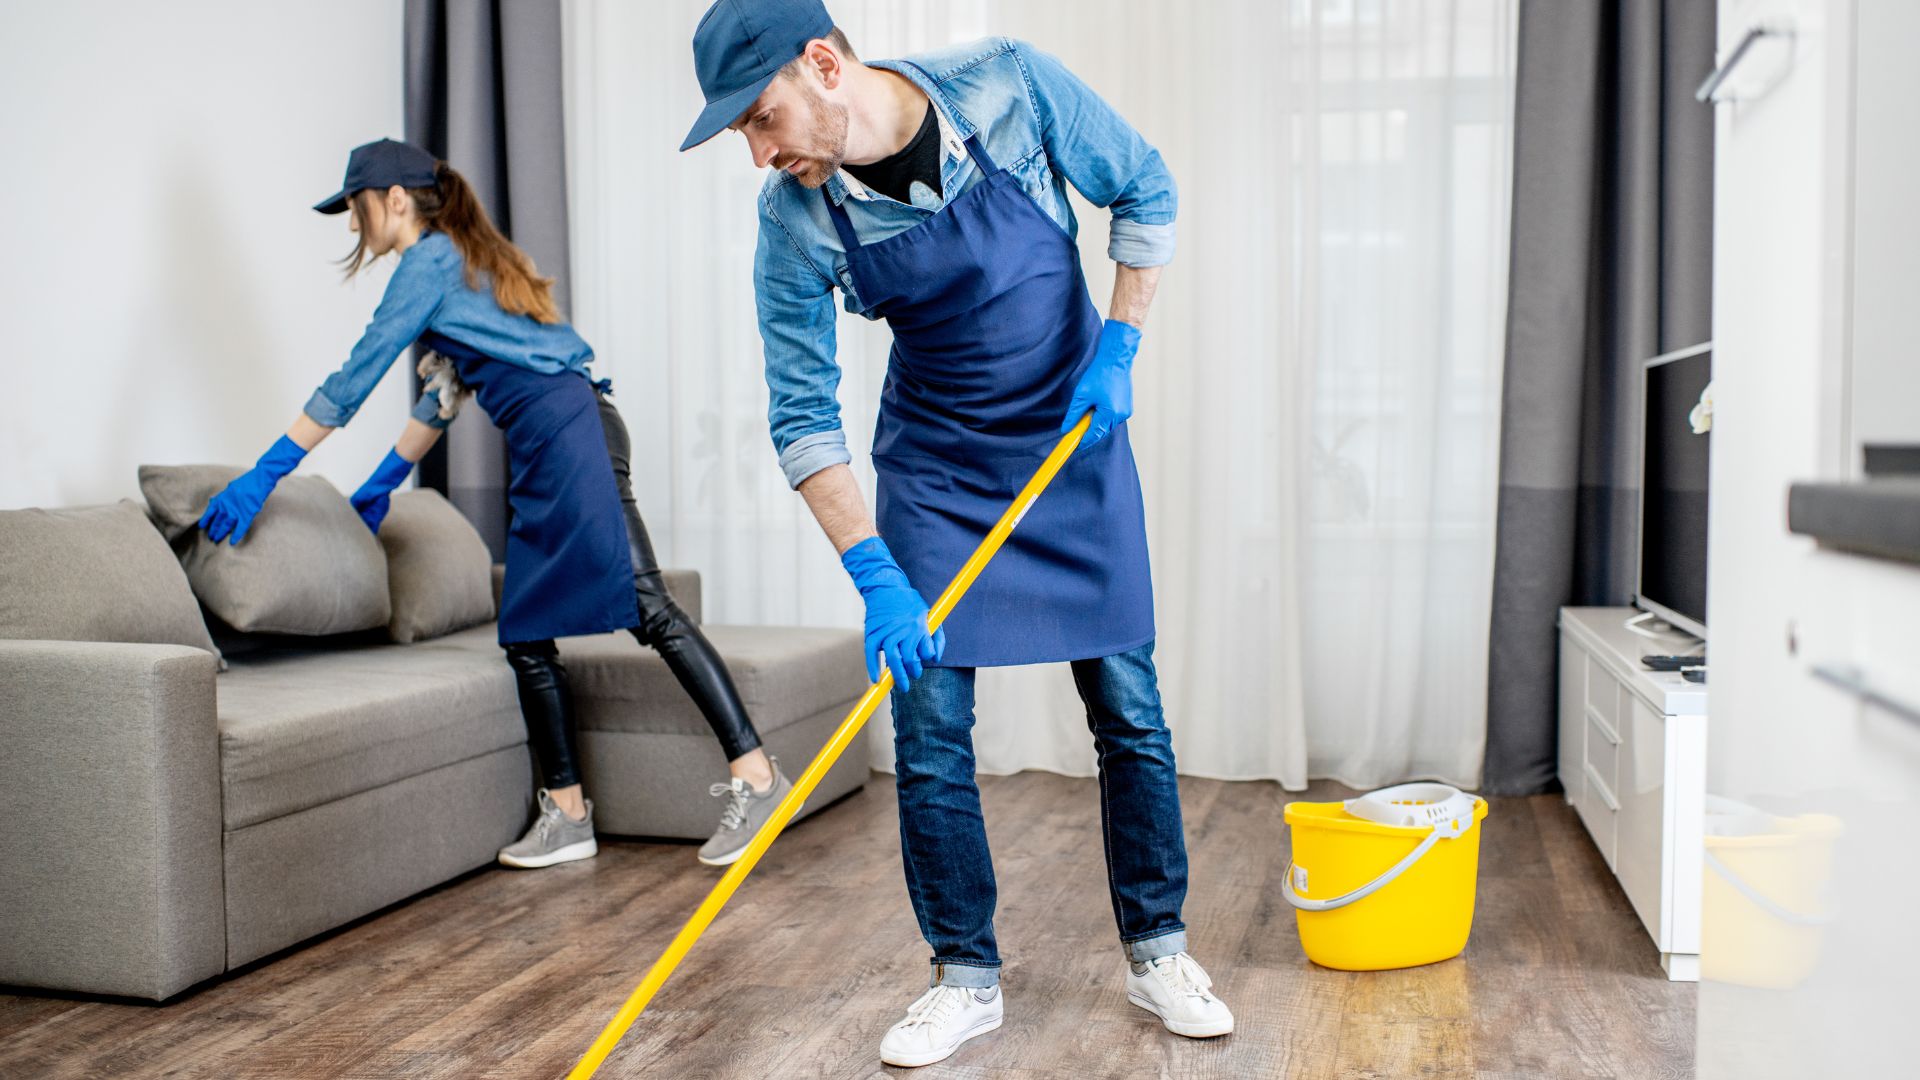 Brabos Housekeeping Services